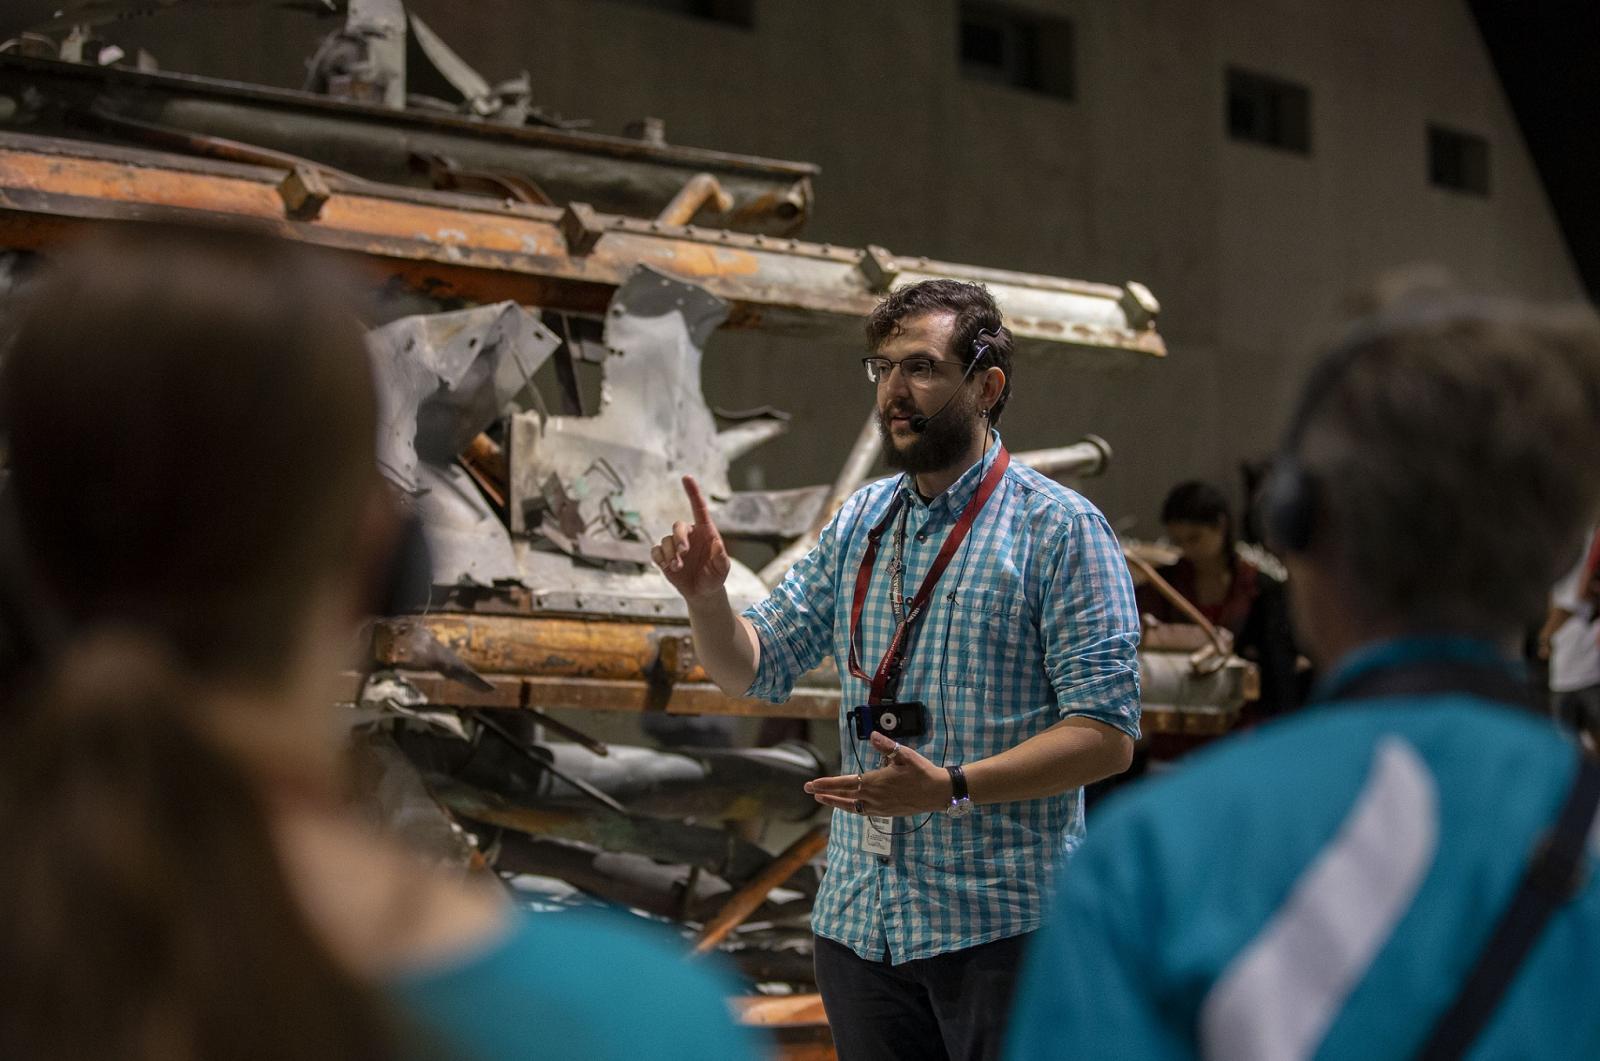 A male tour guide stands in front of the mangled antenna of Tower One as he talks to visitors on a guided tour in Memorial Hall.